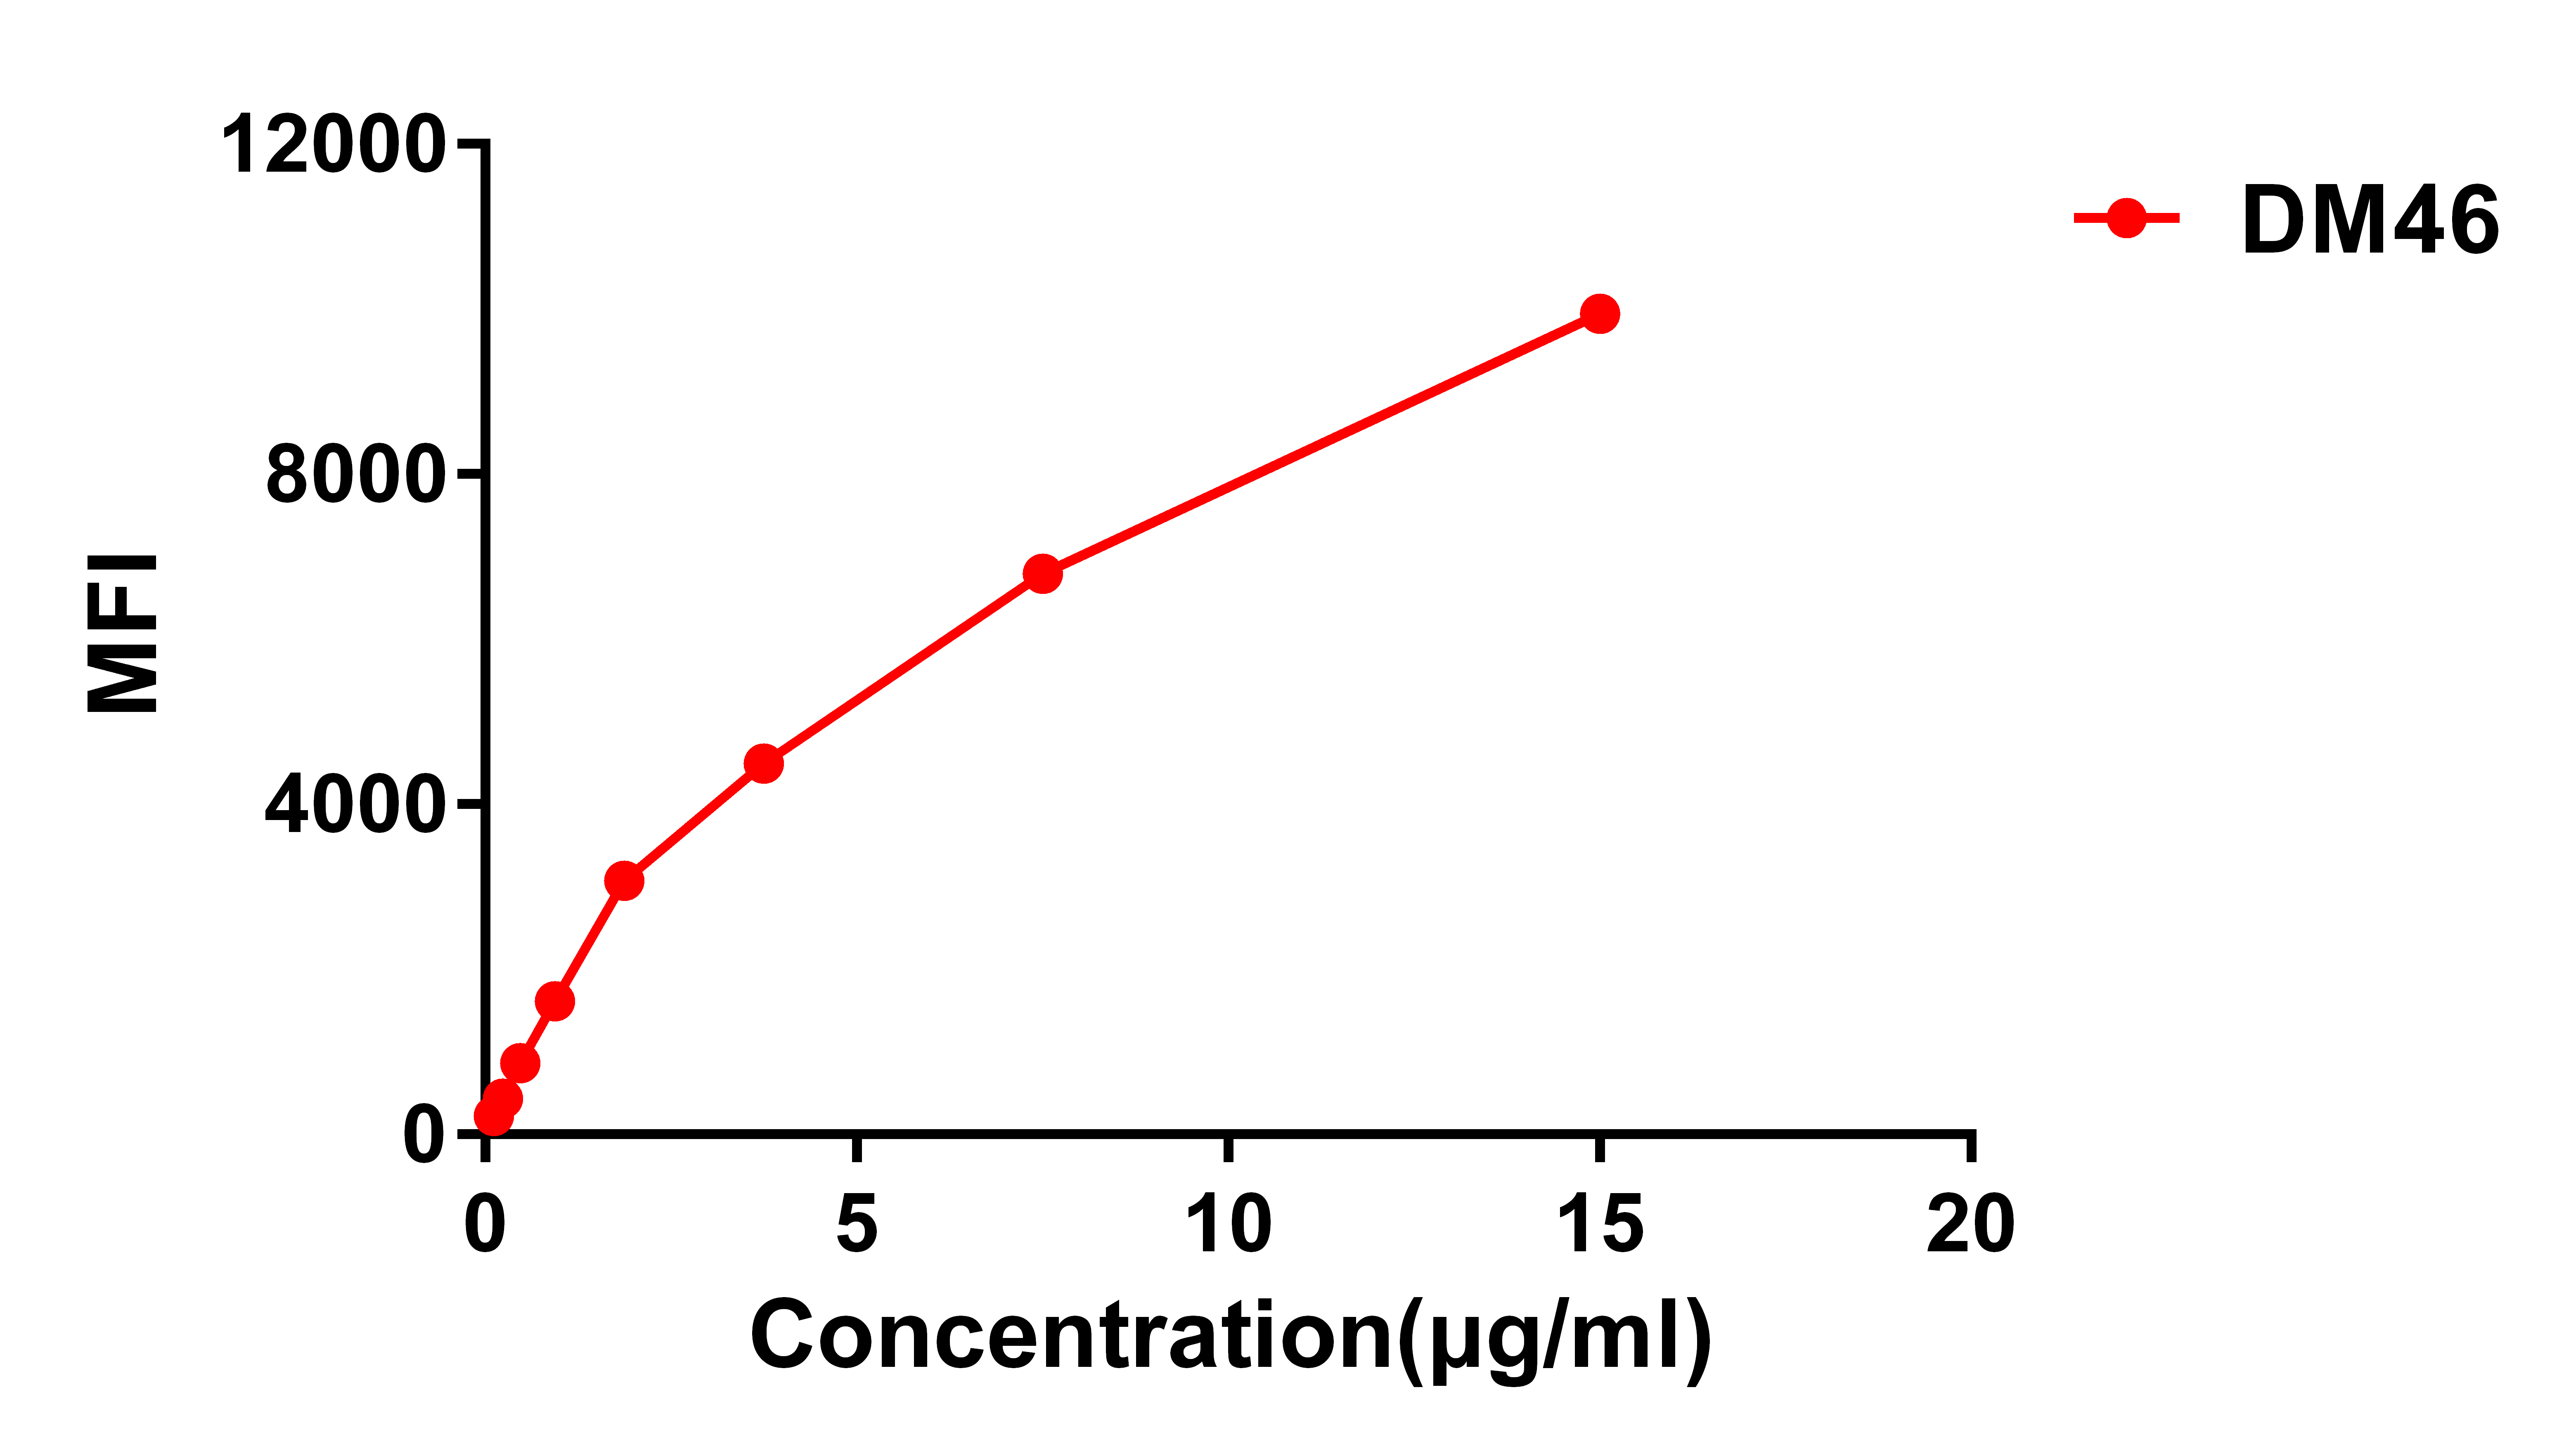 Figure 2. FACS data of serially titrated Rabbit anti-CD138 monoclonal antibody (clone: DM46) on H929 cells. The Y-axis represents the mean fluorescence intensity (MFI) while the X-axis represents the concentration of IgG used.